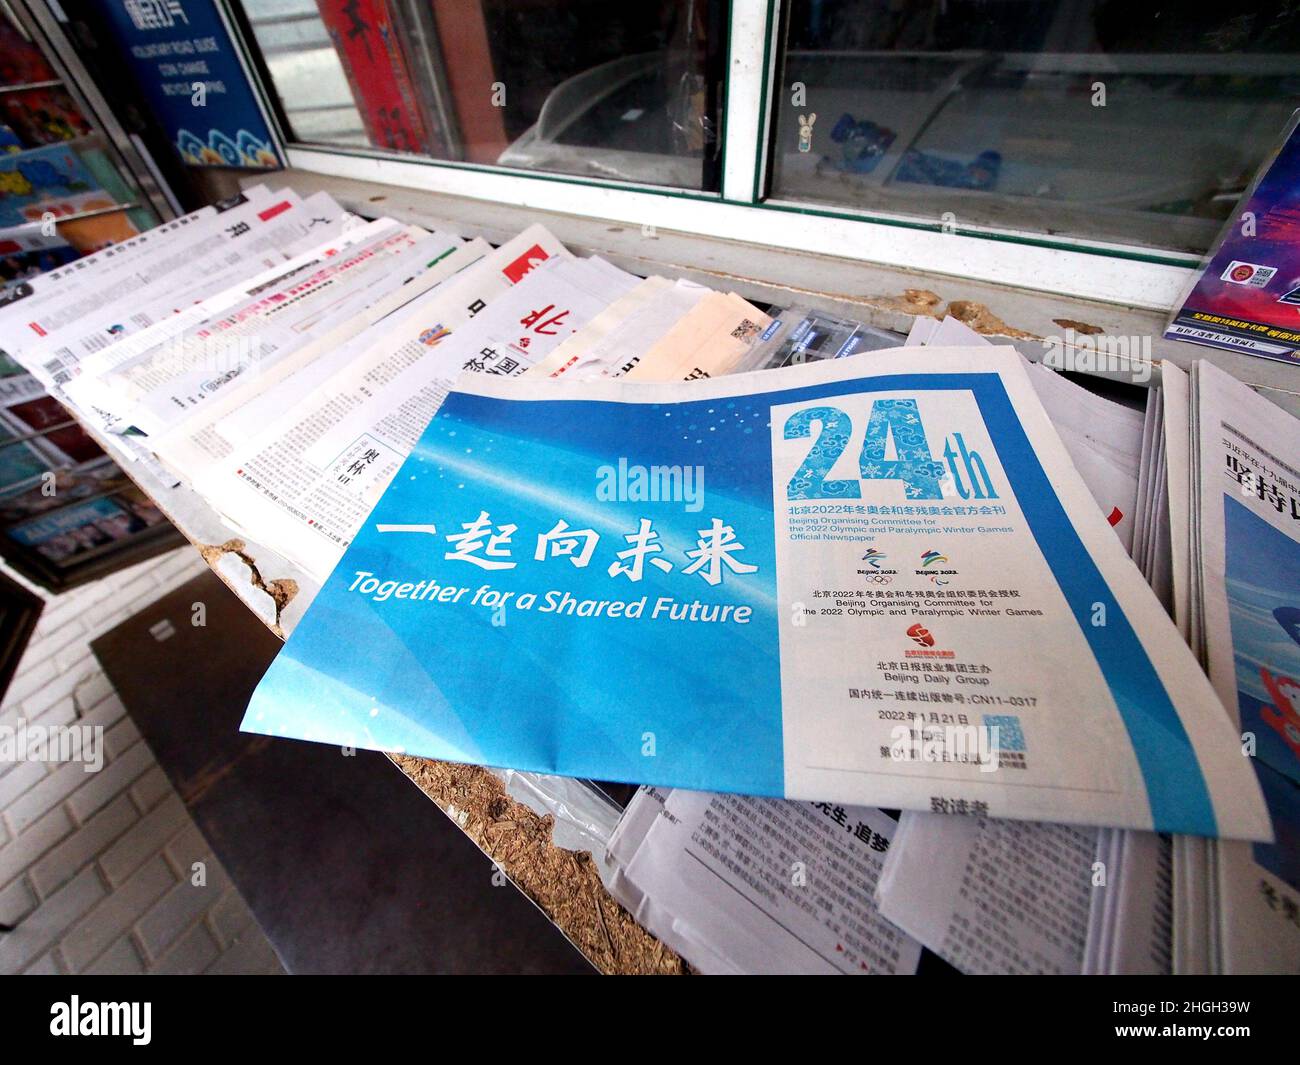 BEIJING, CHINA - JANUARY 212, 2022 - People buy winter Olympics periodicals at a post kiosk in Beijing, Capital of China, Jan. 21, 2022. The official Stock Photo